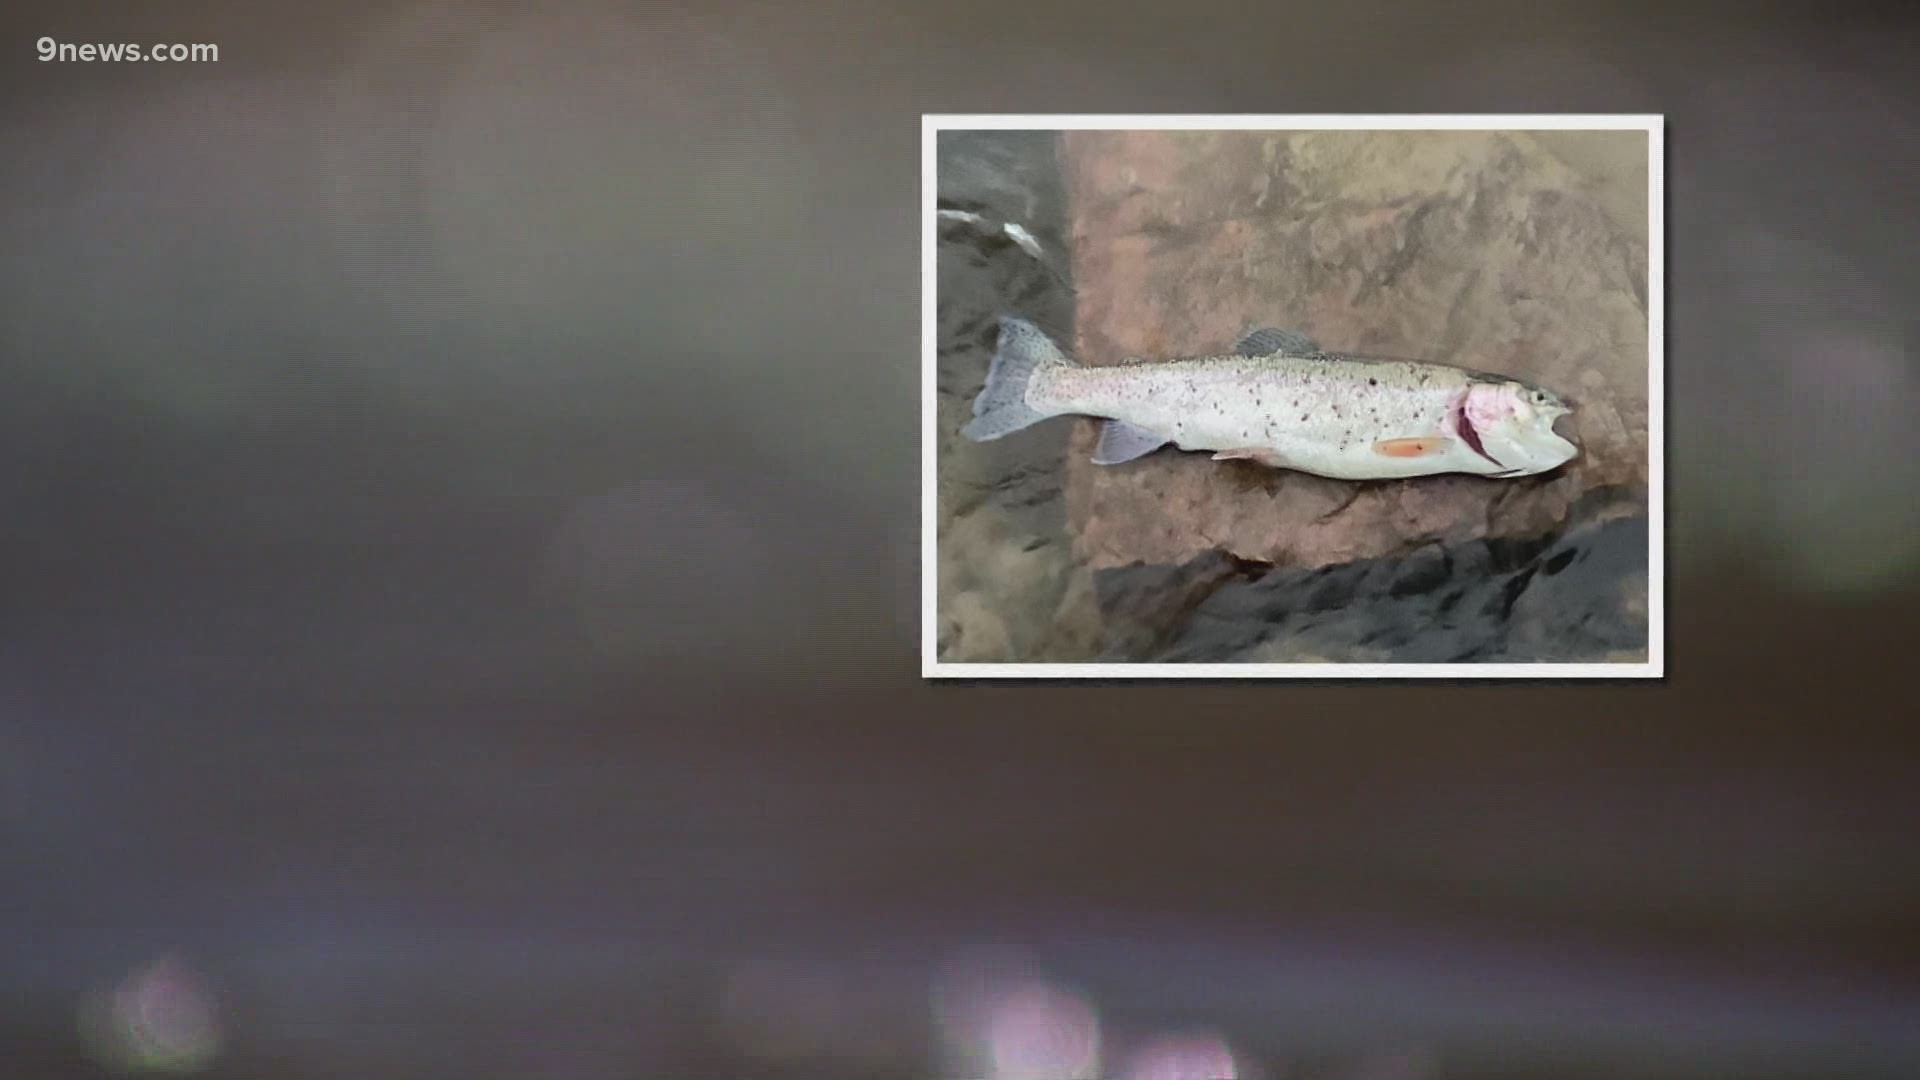 Hundreds of fish have been killed off since St. Vrain spill on Tuesday.